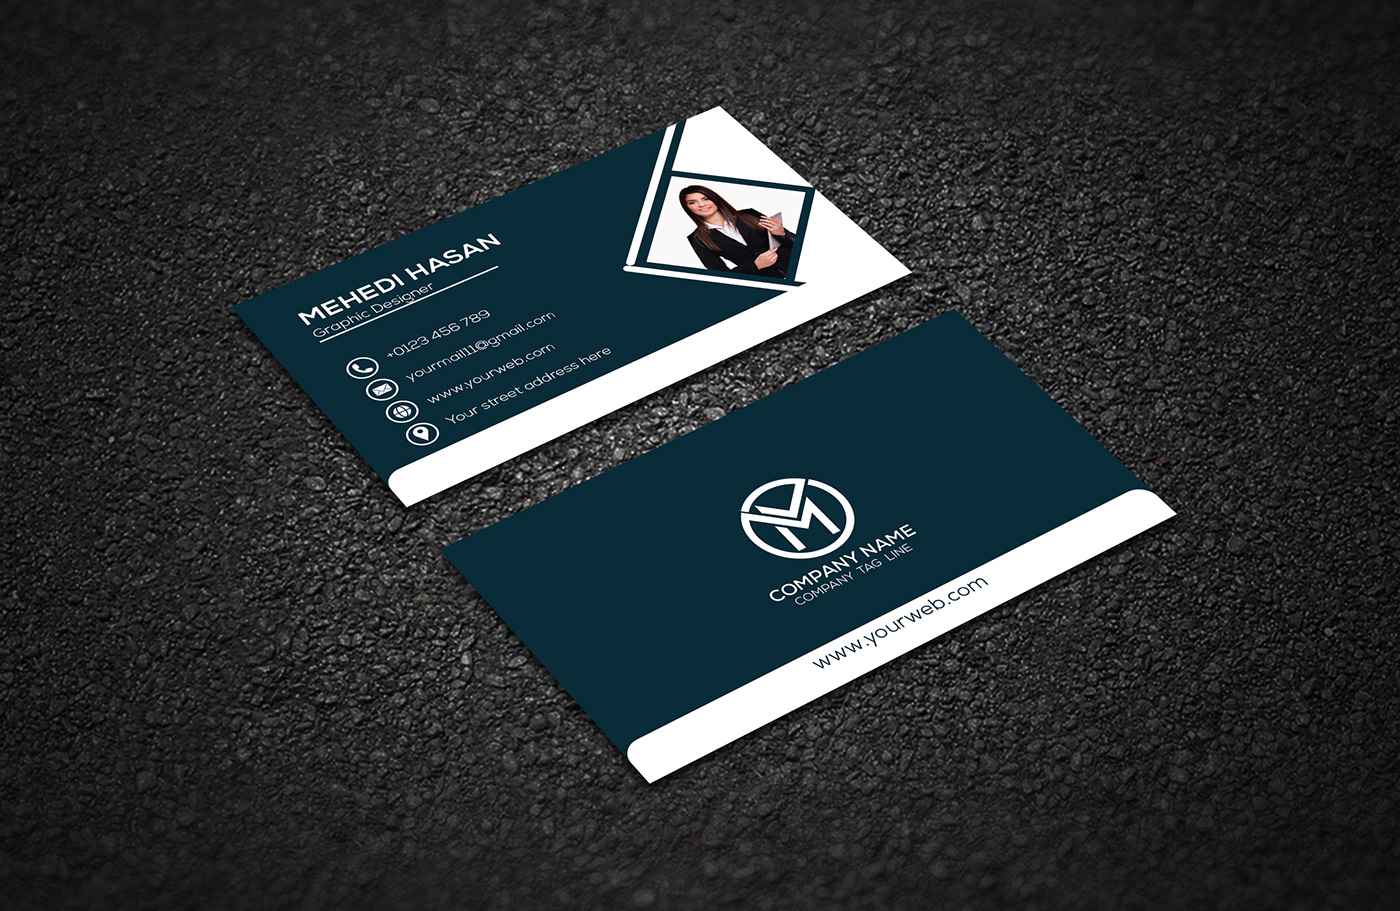 business card Business card design Business card project Business card template corporate creative card creative business card design card Graphic Design. Name card visiting card